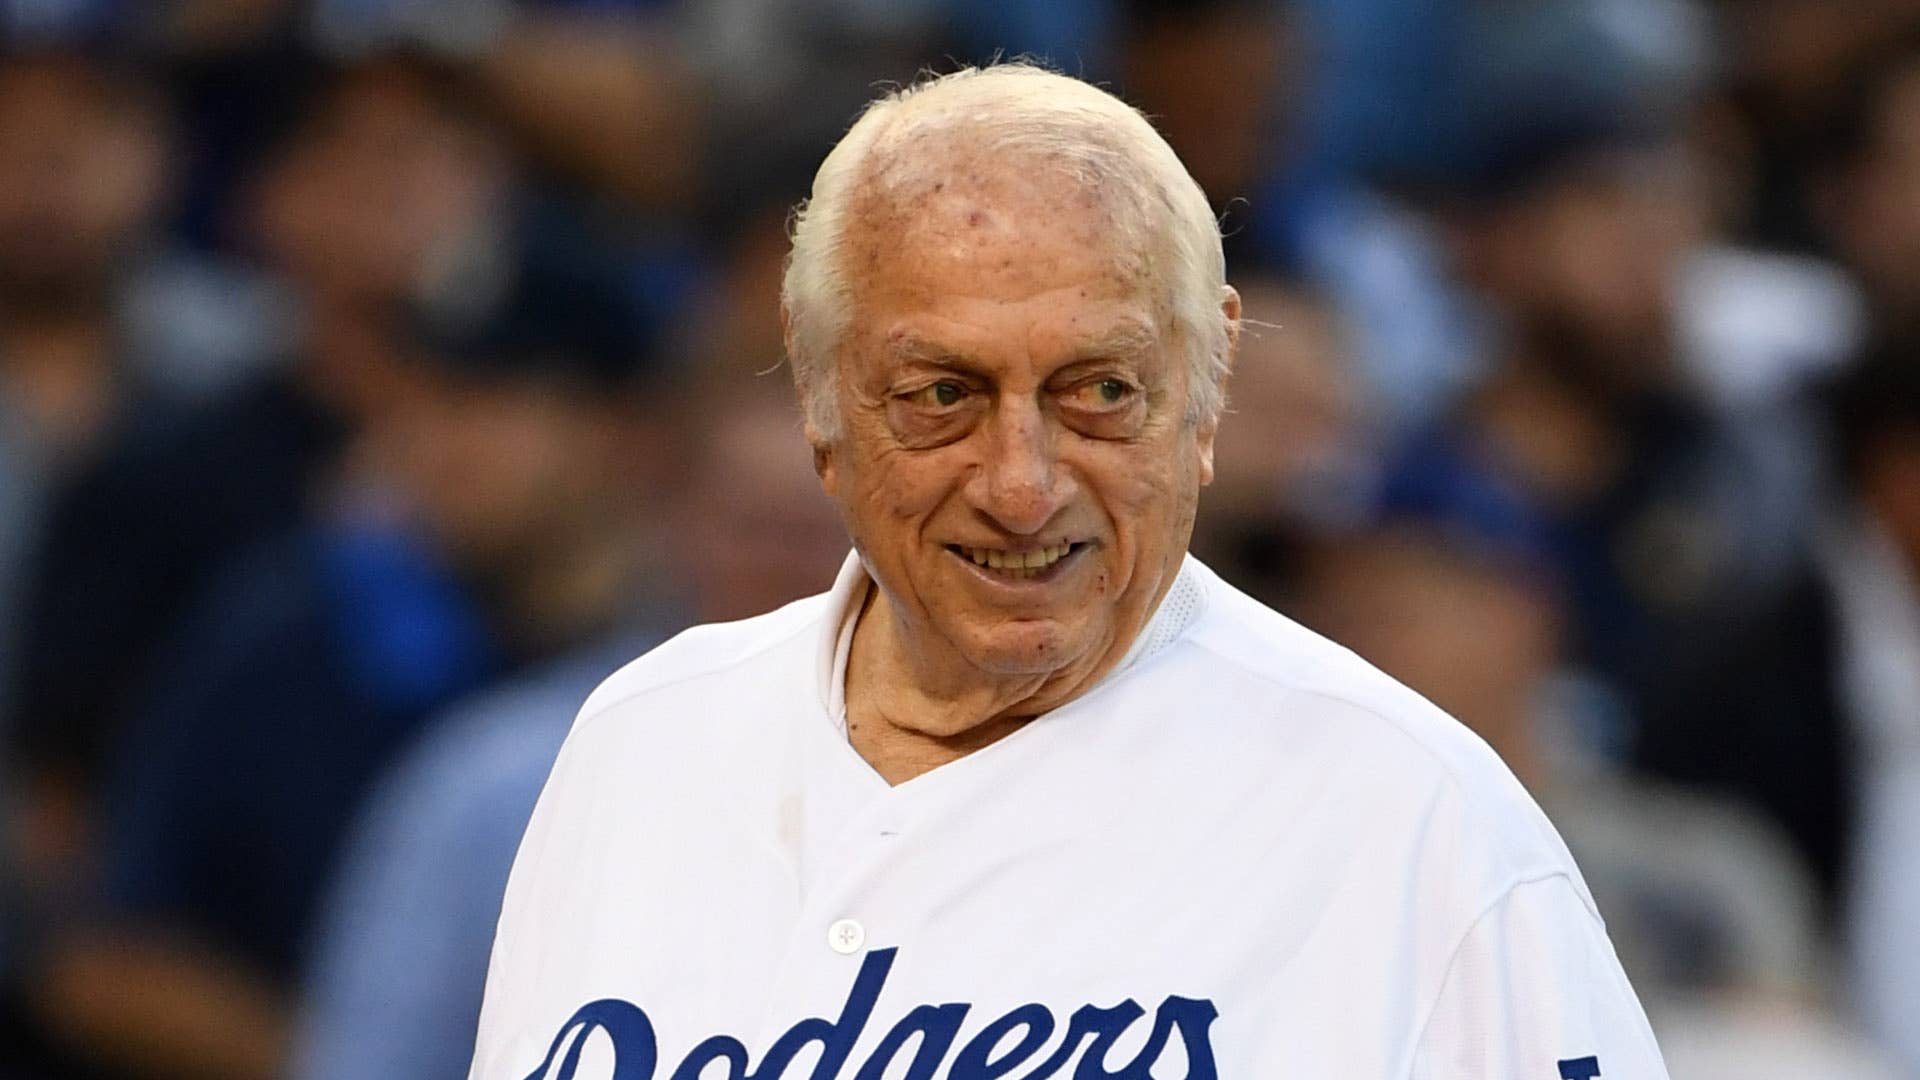 Hall of Fame manager Tommy Lasorda